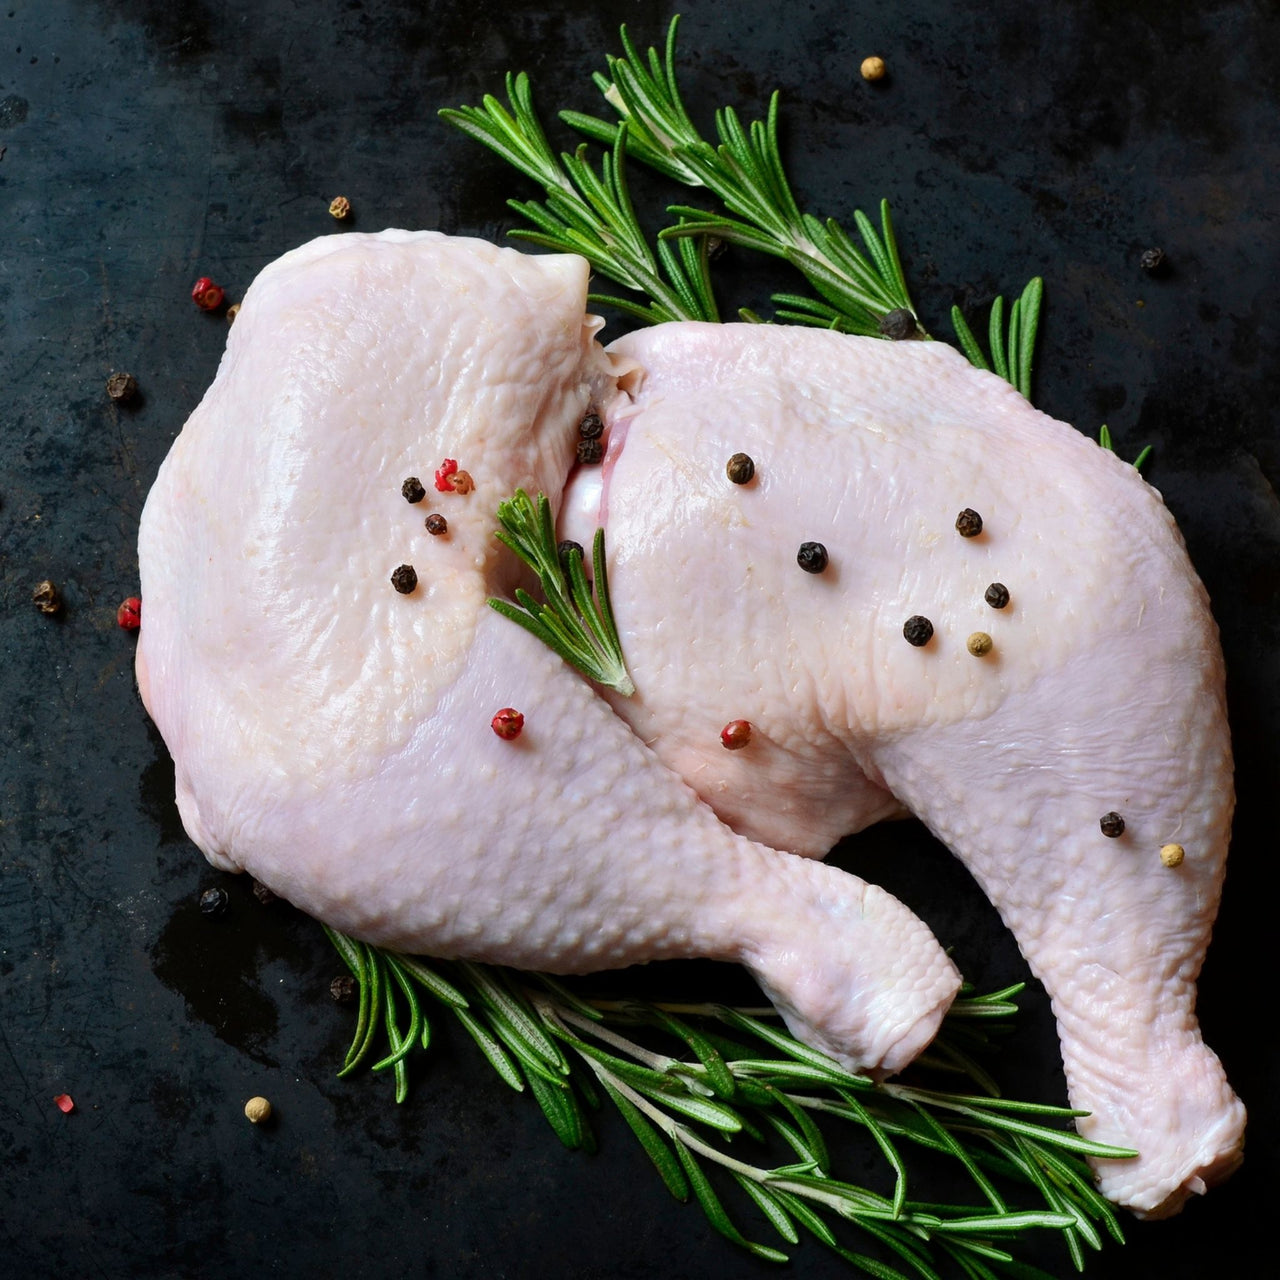 Image of F2F Certified Organic Chicken Variety Pack 8.1kg